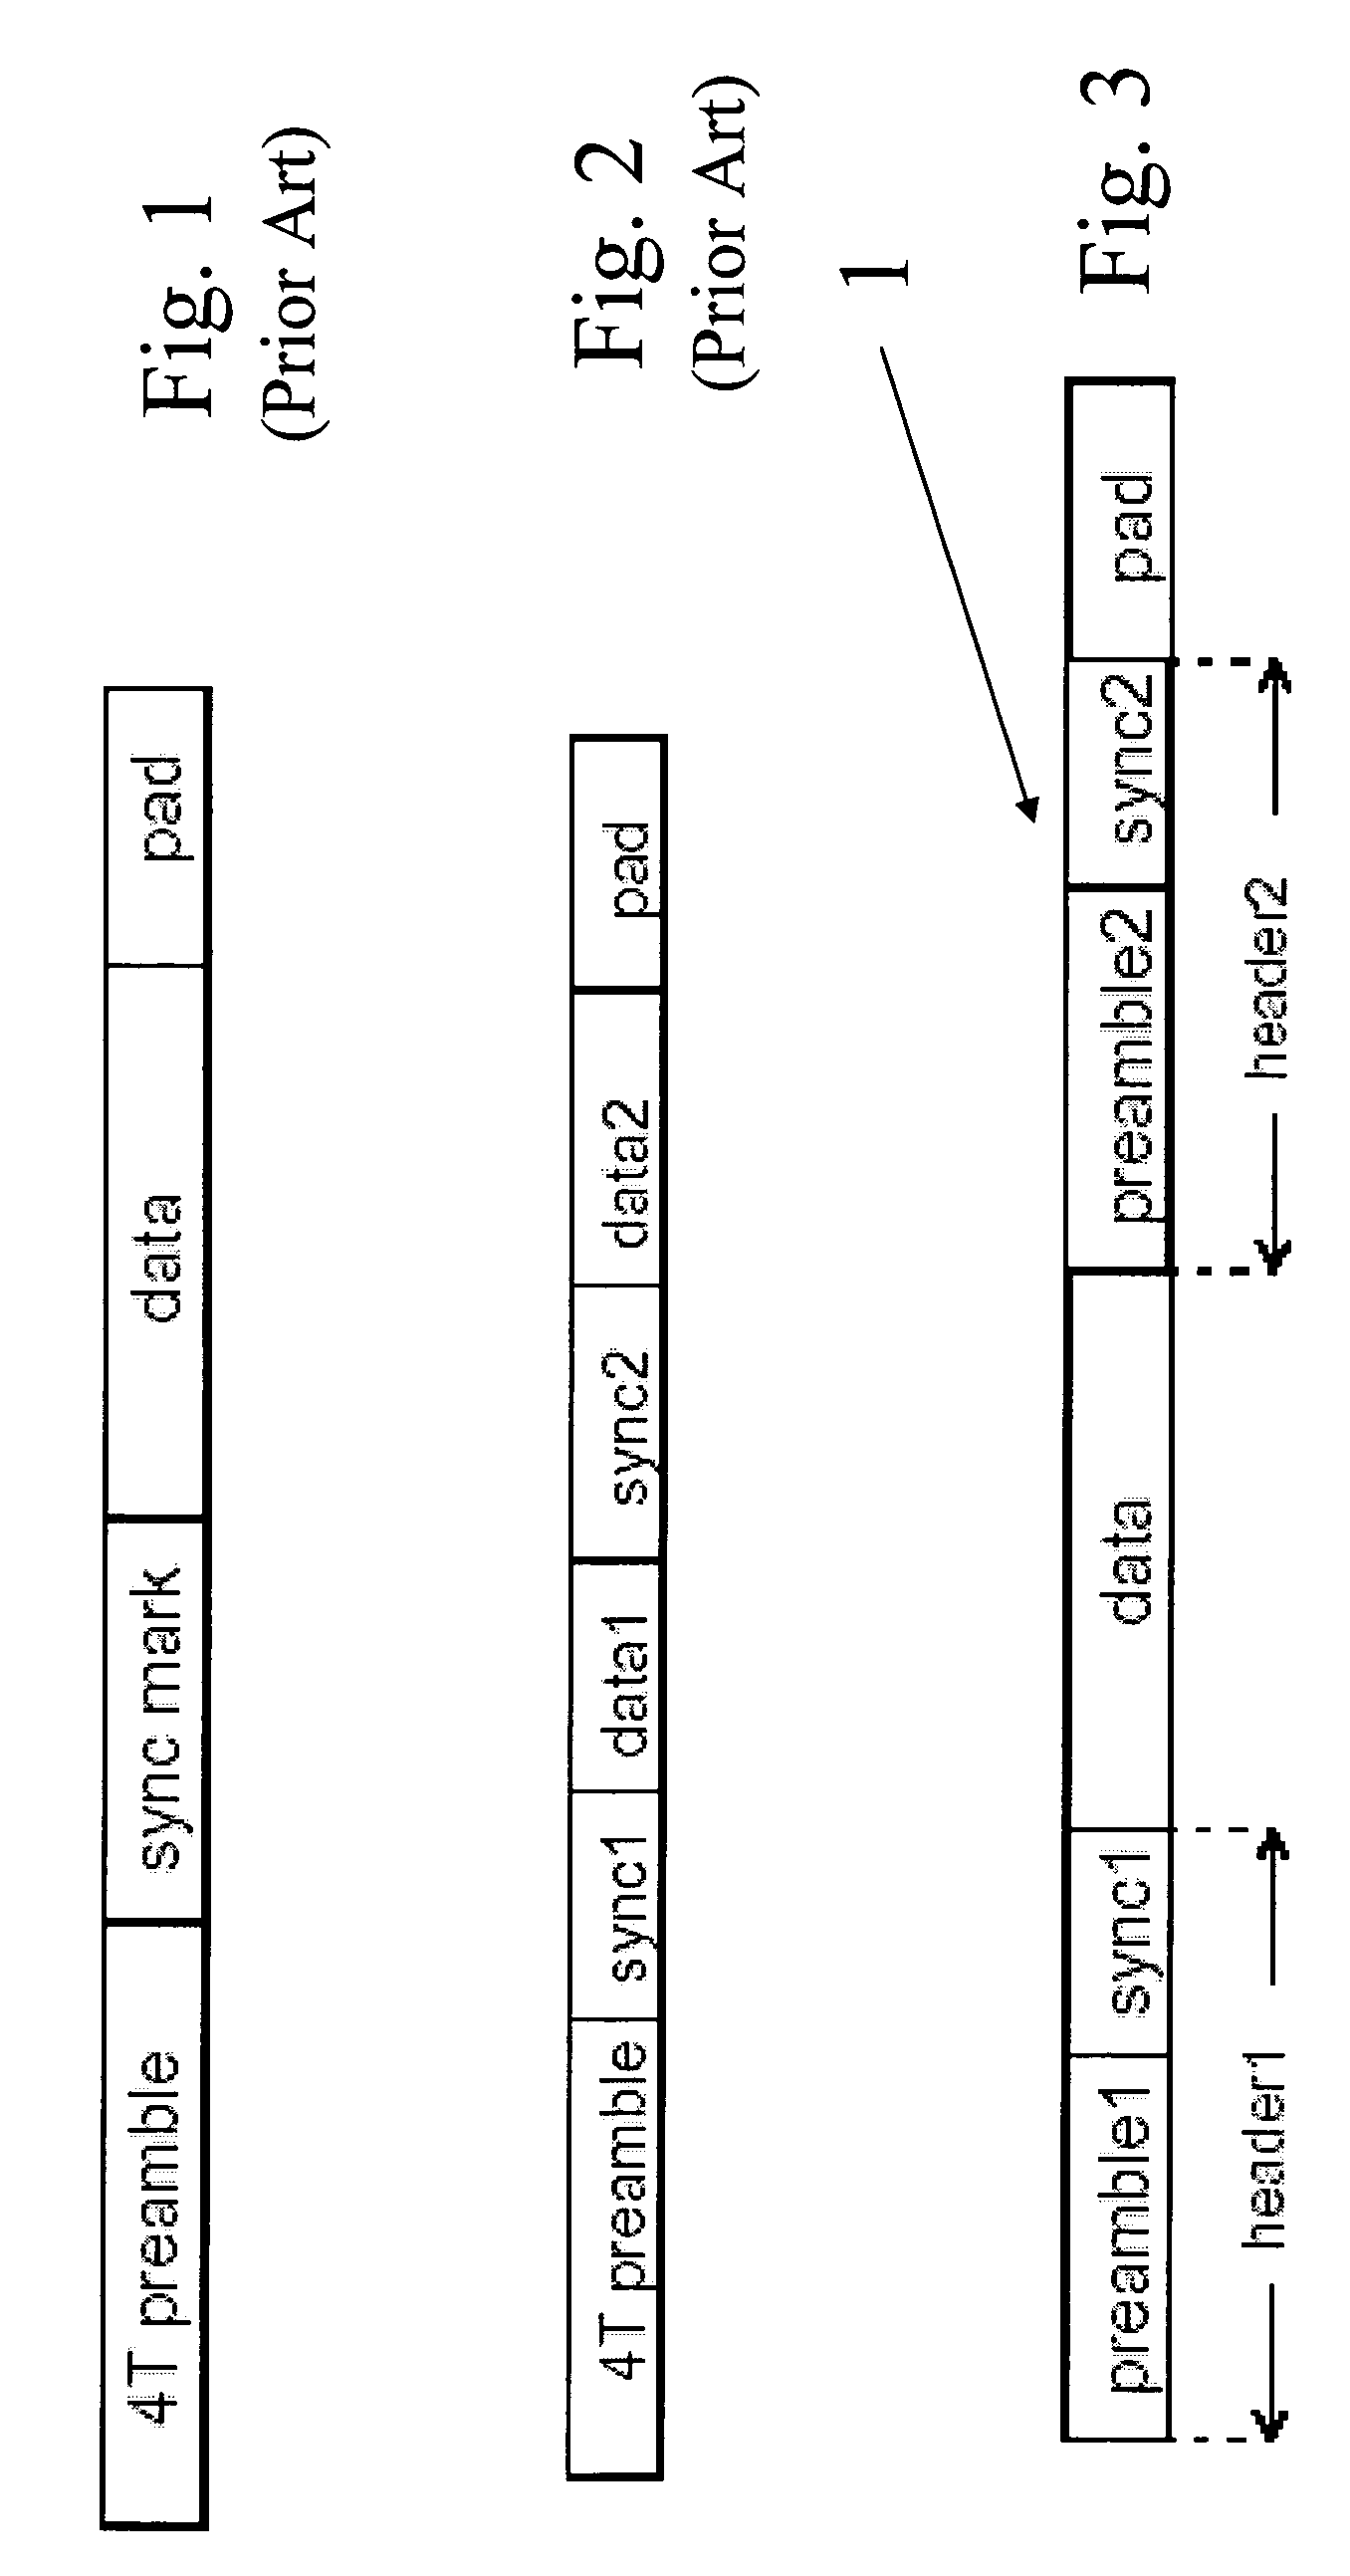 Method to improve data reliability on hard disk drive systems